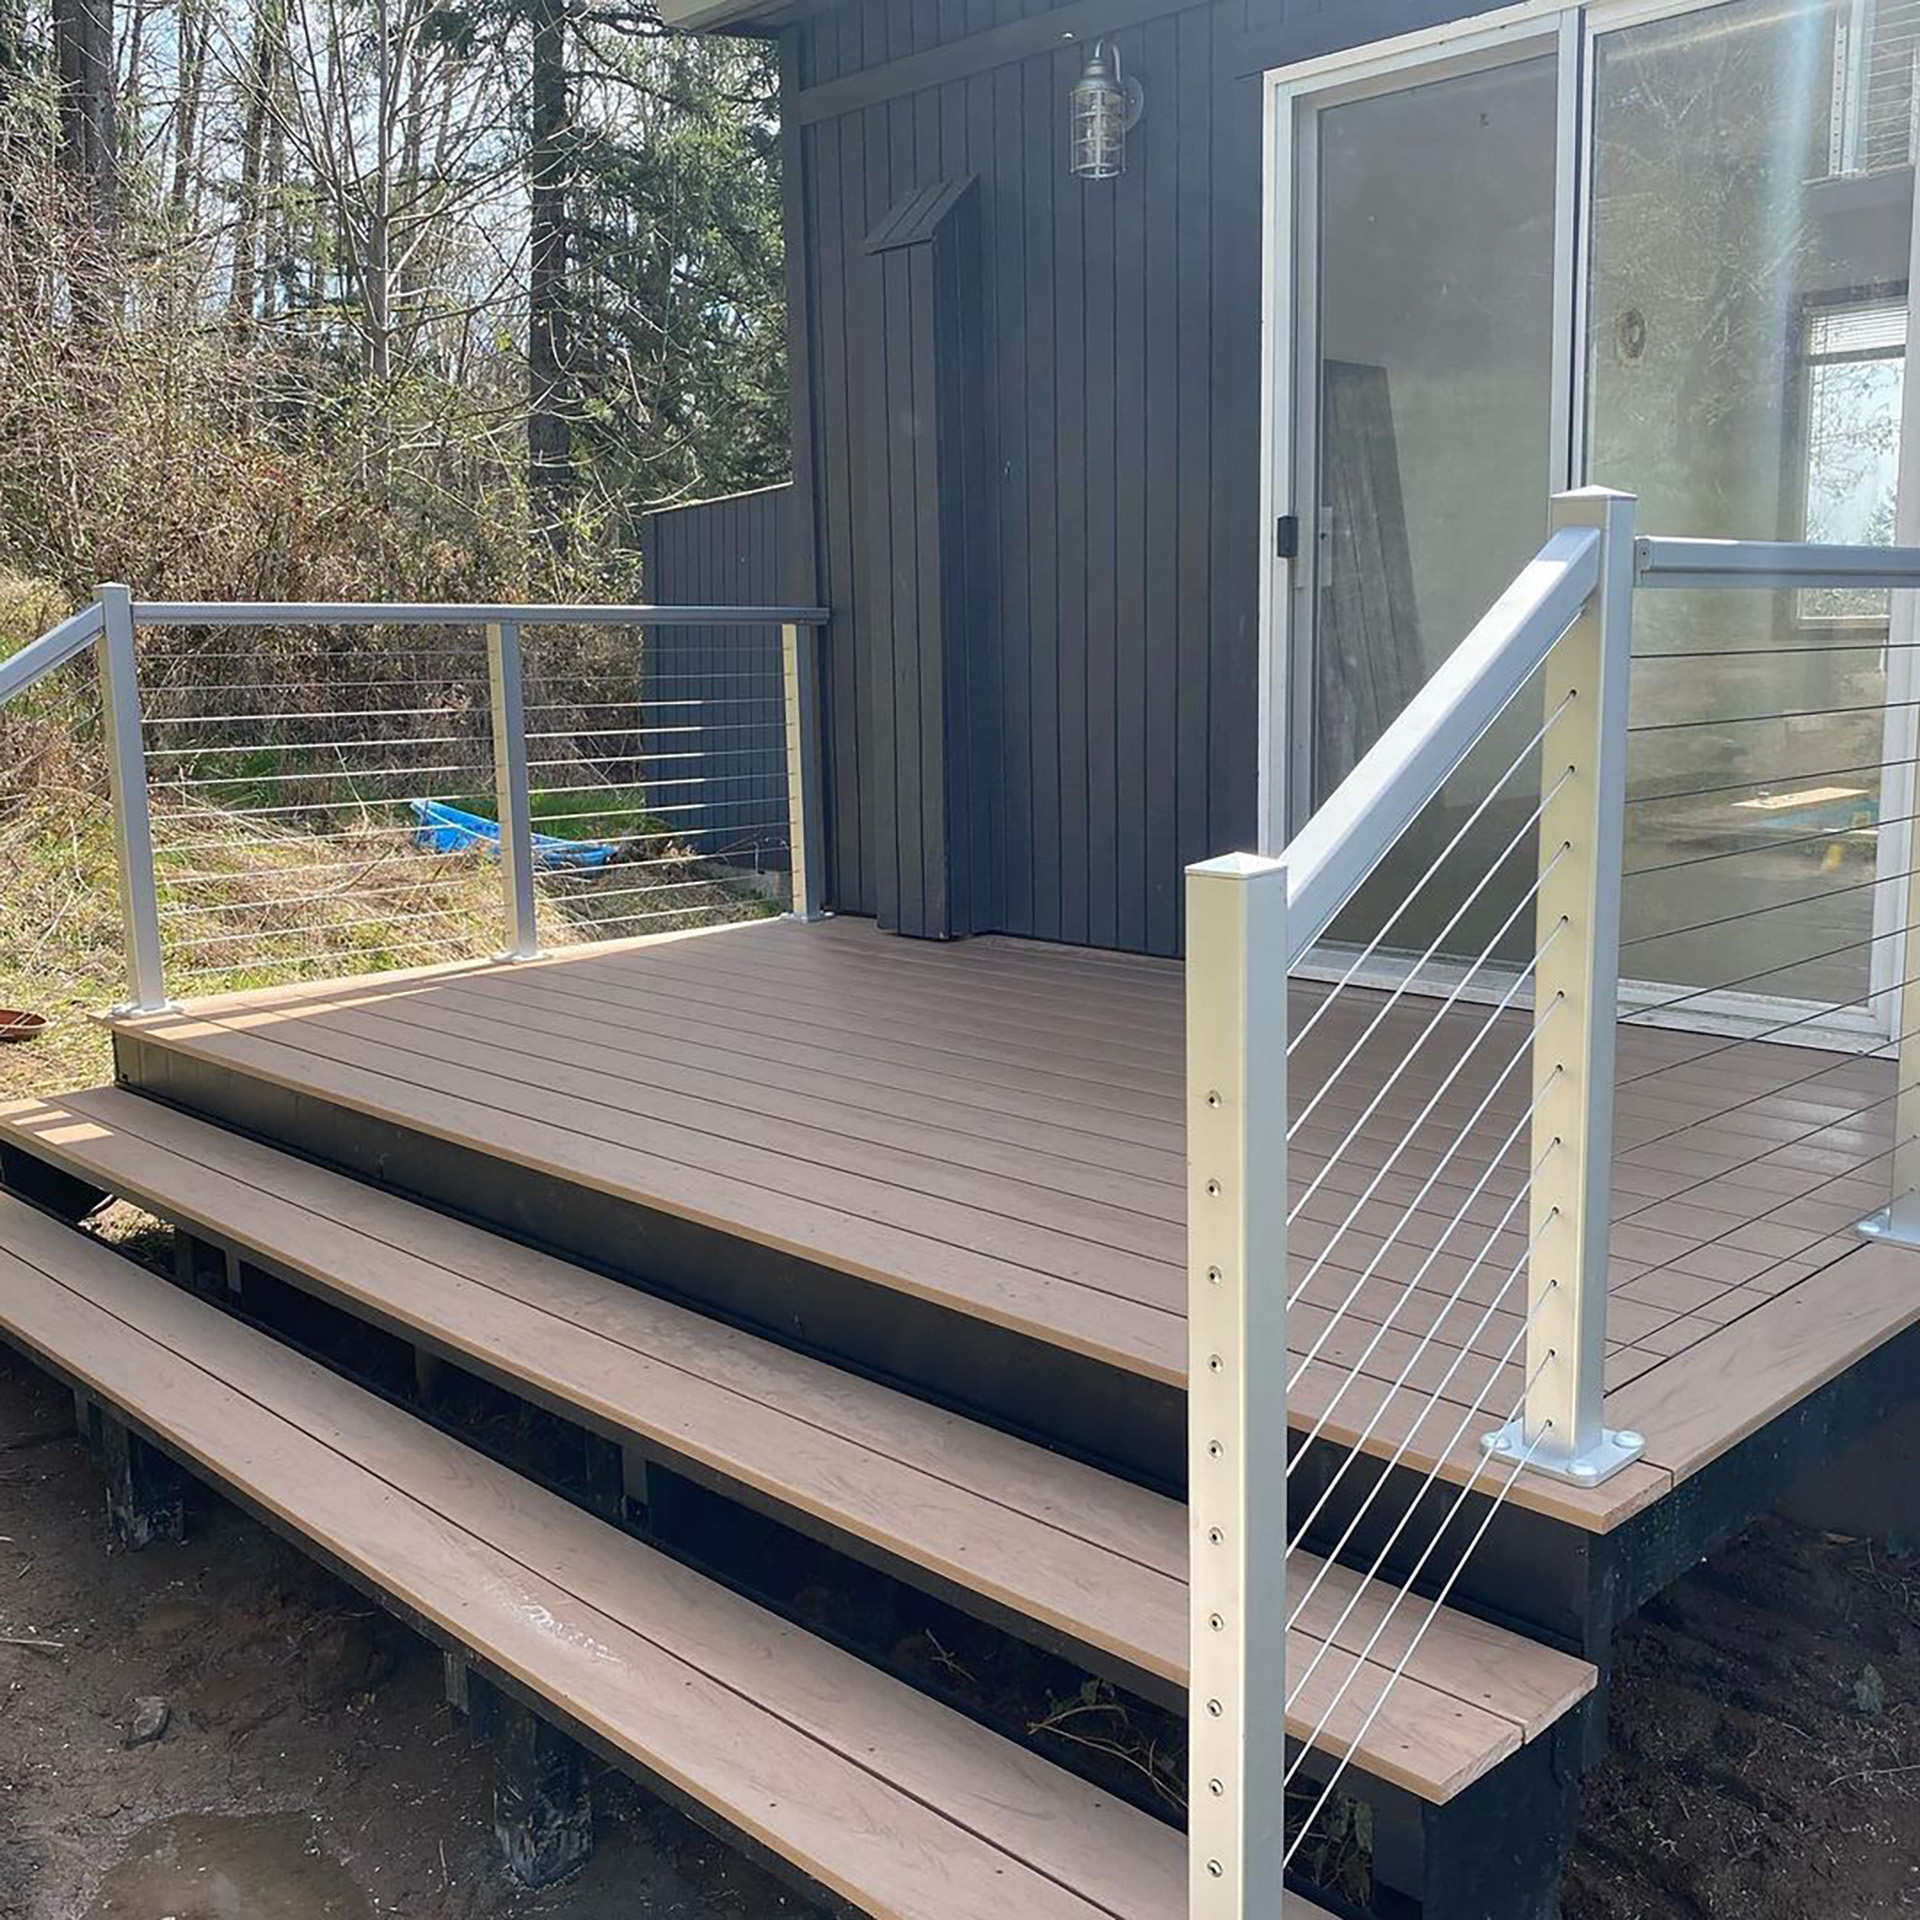 Completed residential deck with steel framing and modern railings.